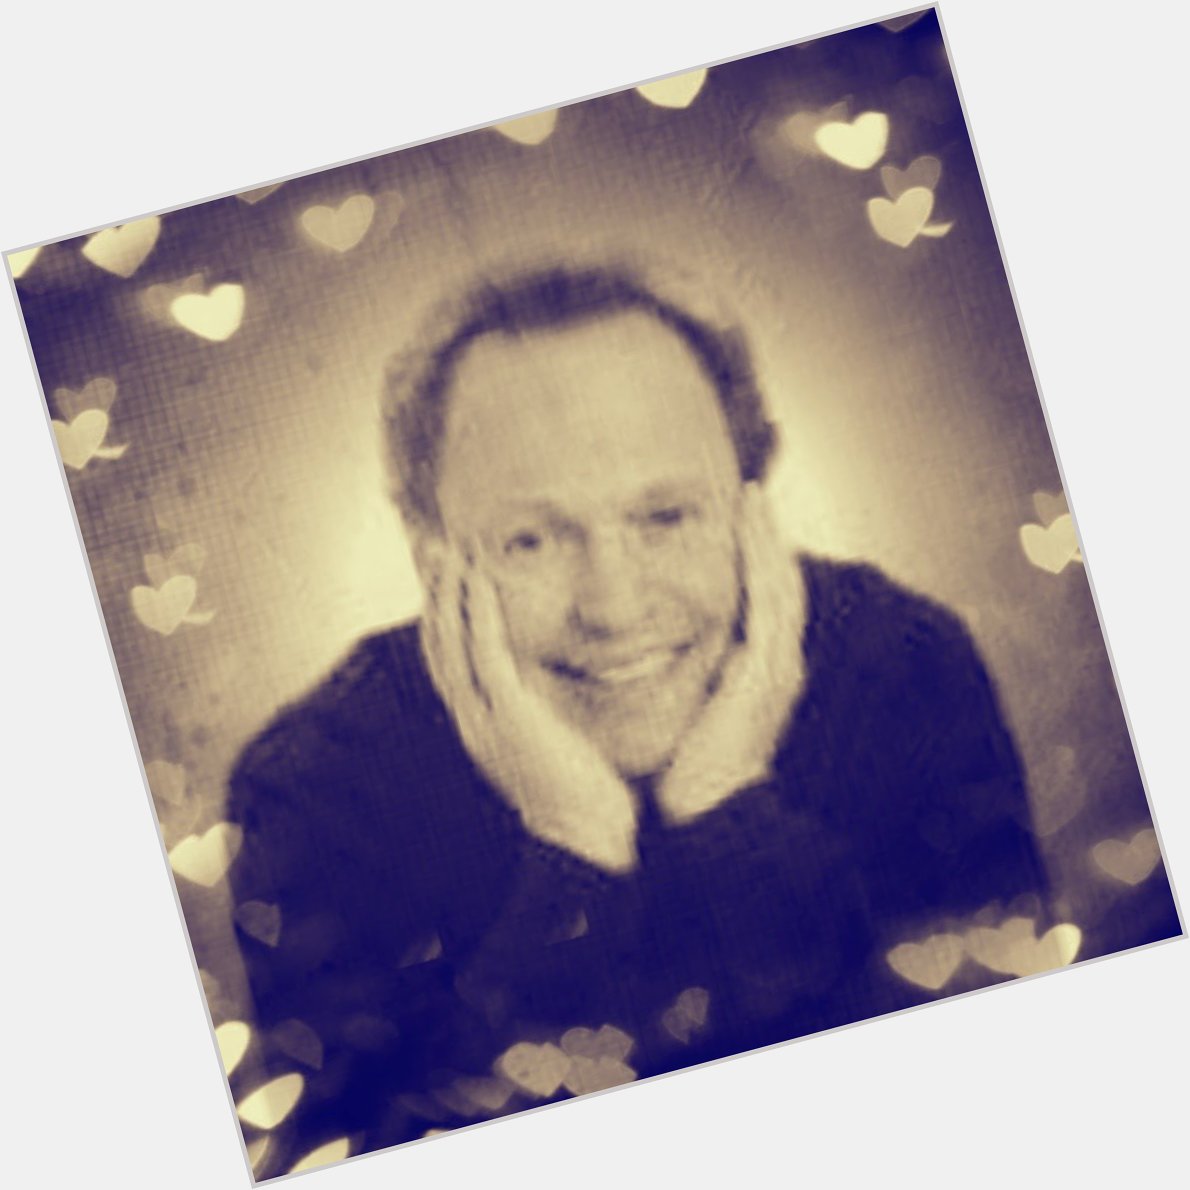  Happy Birthday Carnie Wilson from me and handsome Billy Crystal 